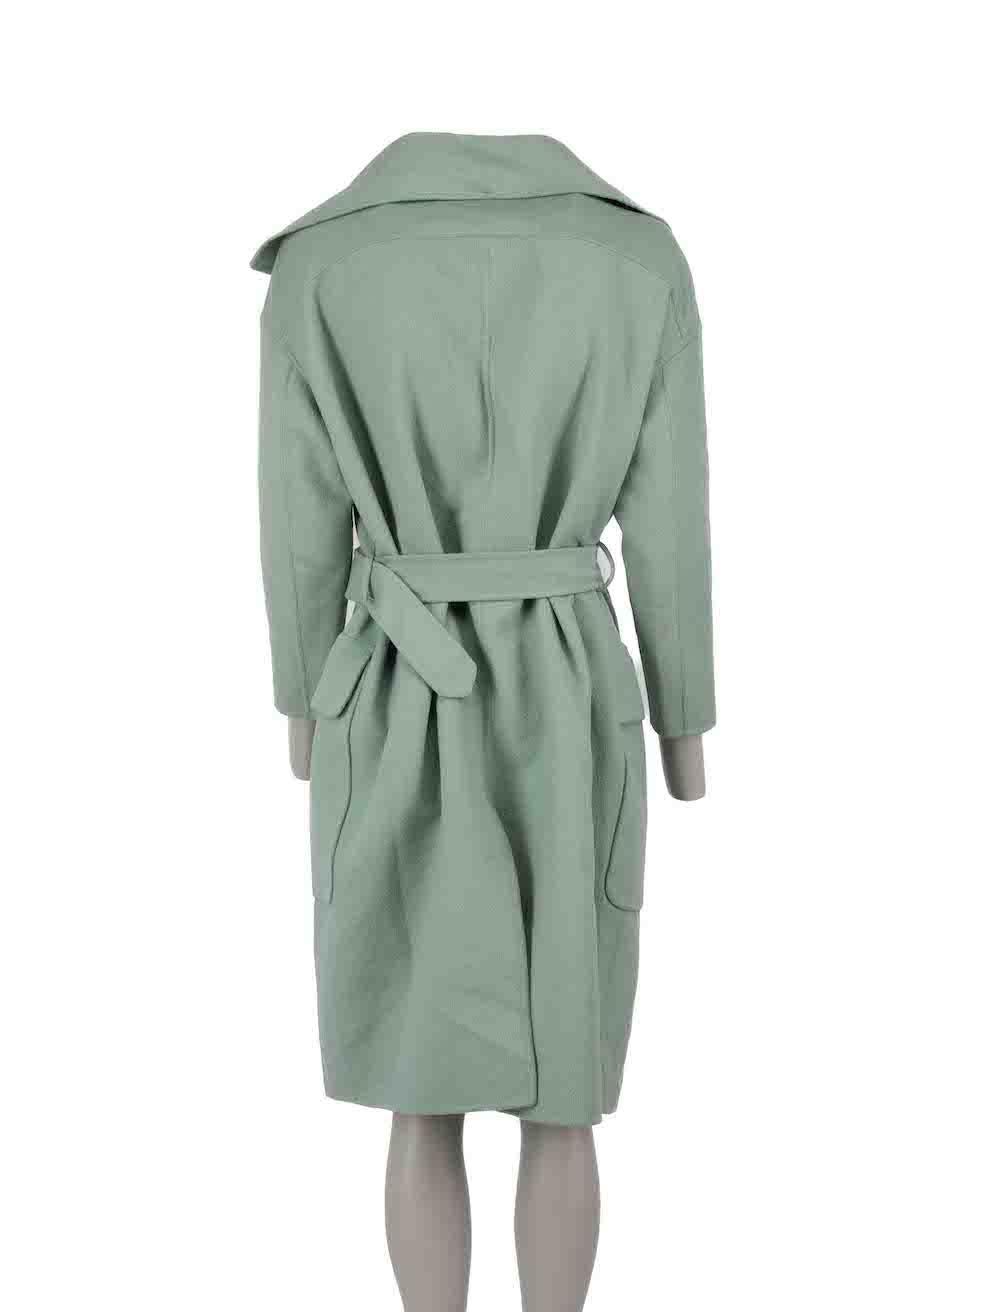 Gray Burberry Burberry Prorsum Mint Green Wool Waterfall Belted Coat Size XS